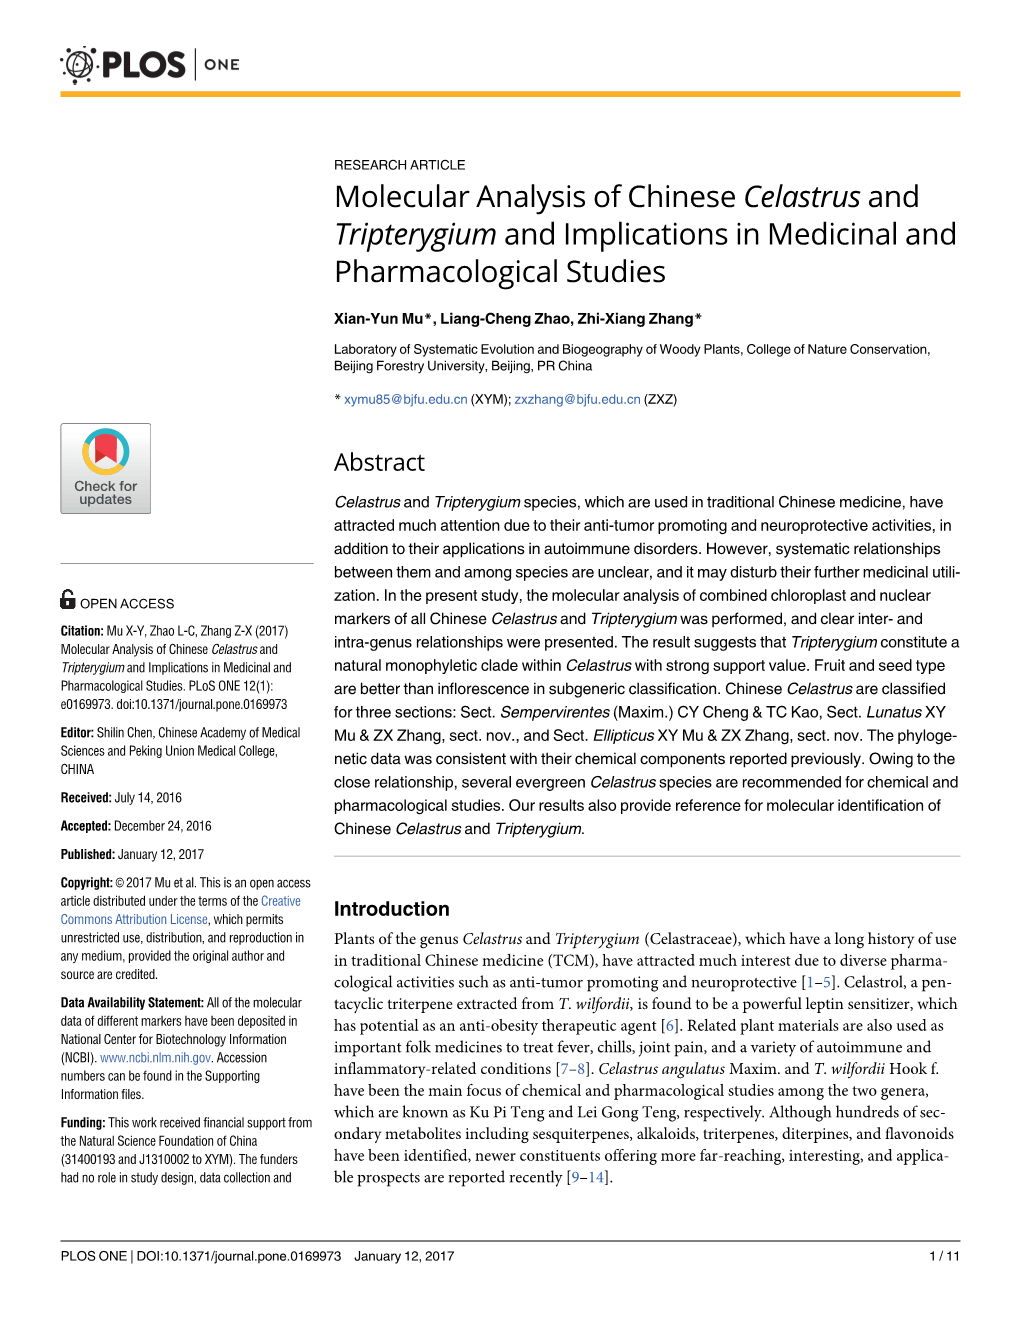 Molecular Analysis of Chinese Celastrus and Tripterygium and Implications in Medicinal and Pharmacological Studies